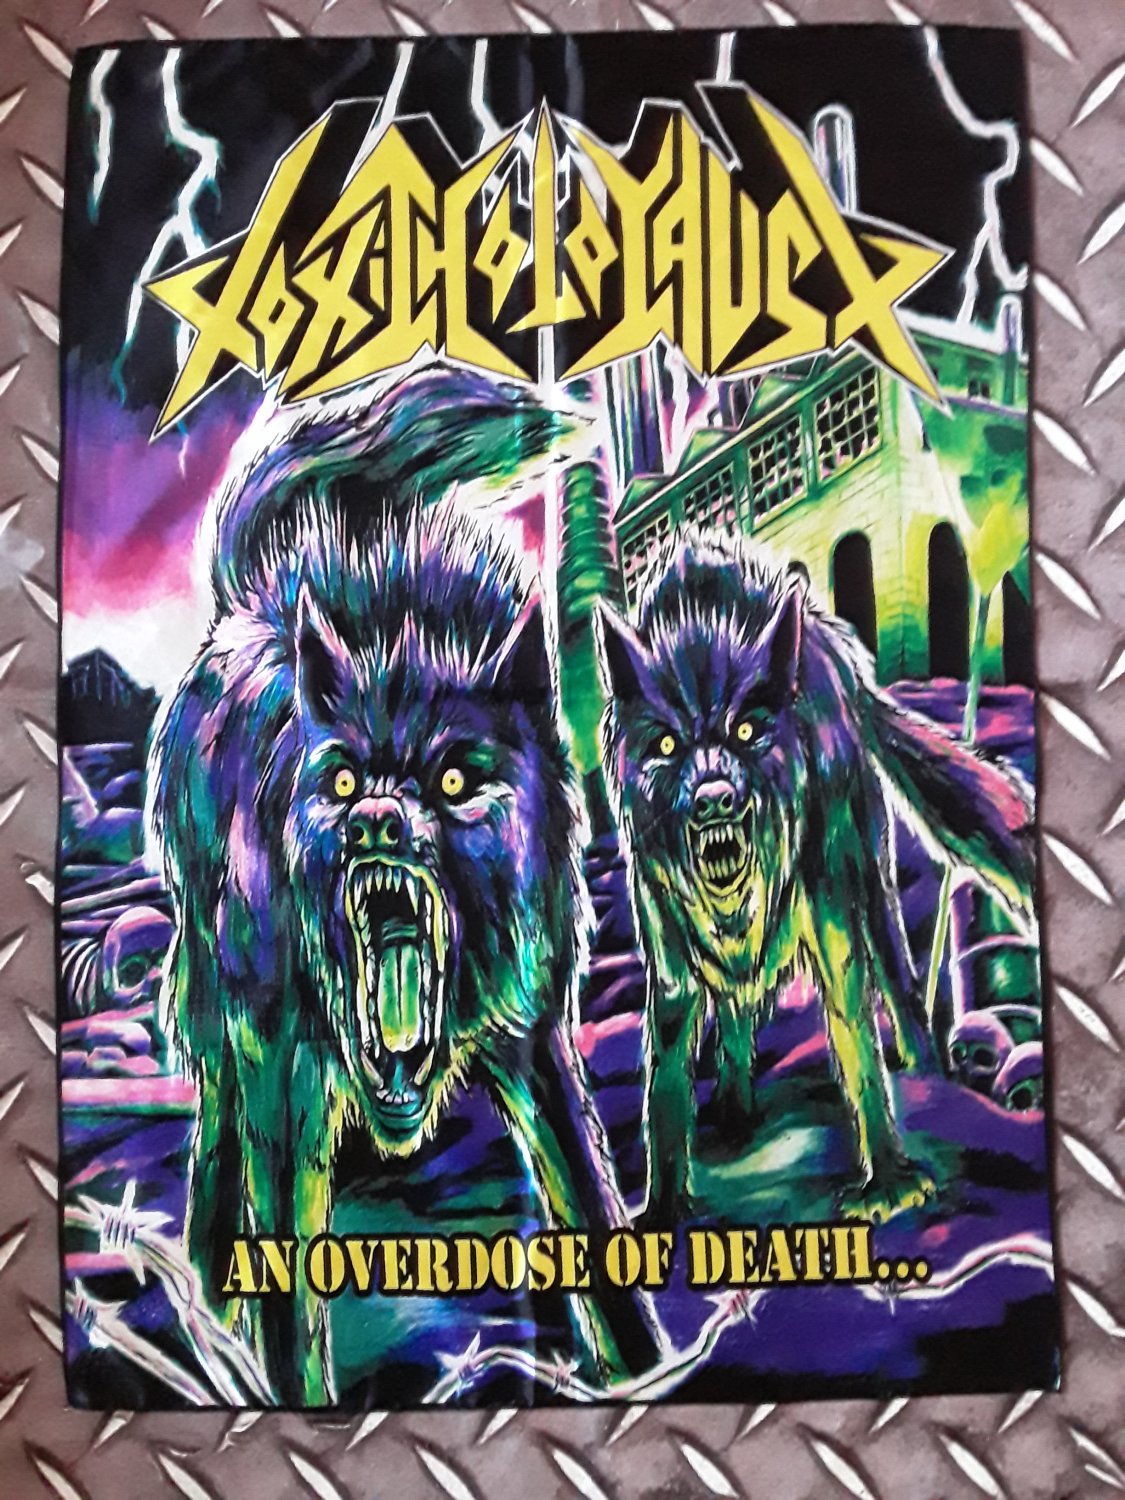 TOXIC HOLOCAUST - An overdose of death FLAG cloth POSTER Banner Thrash METAL